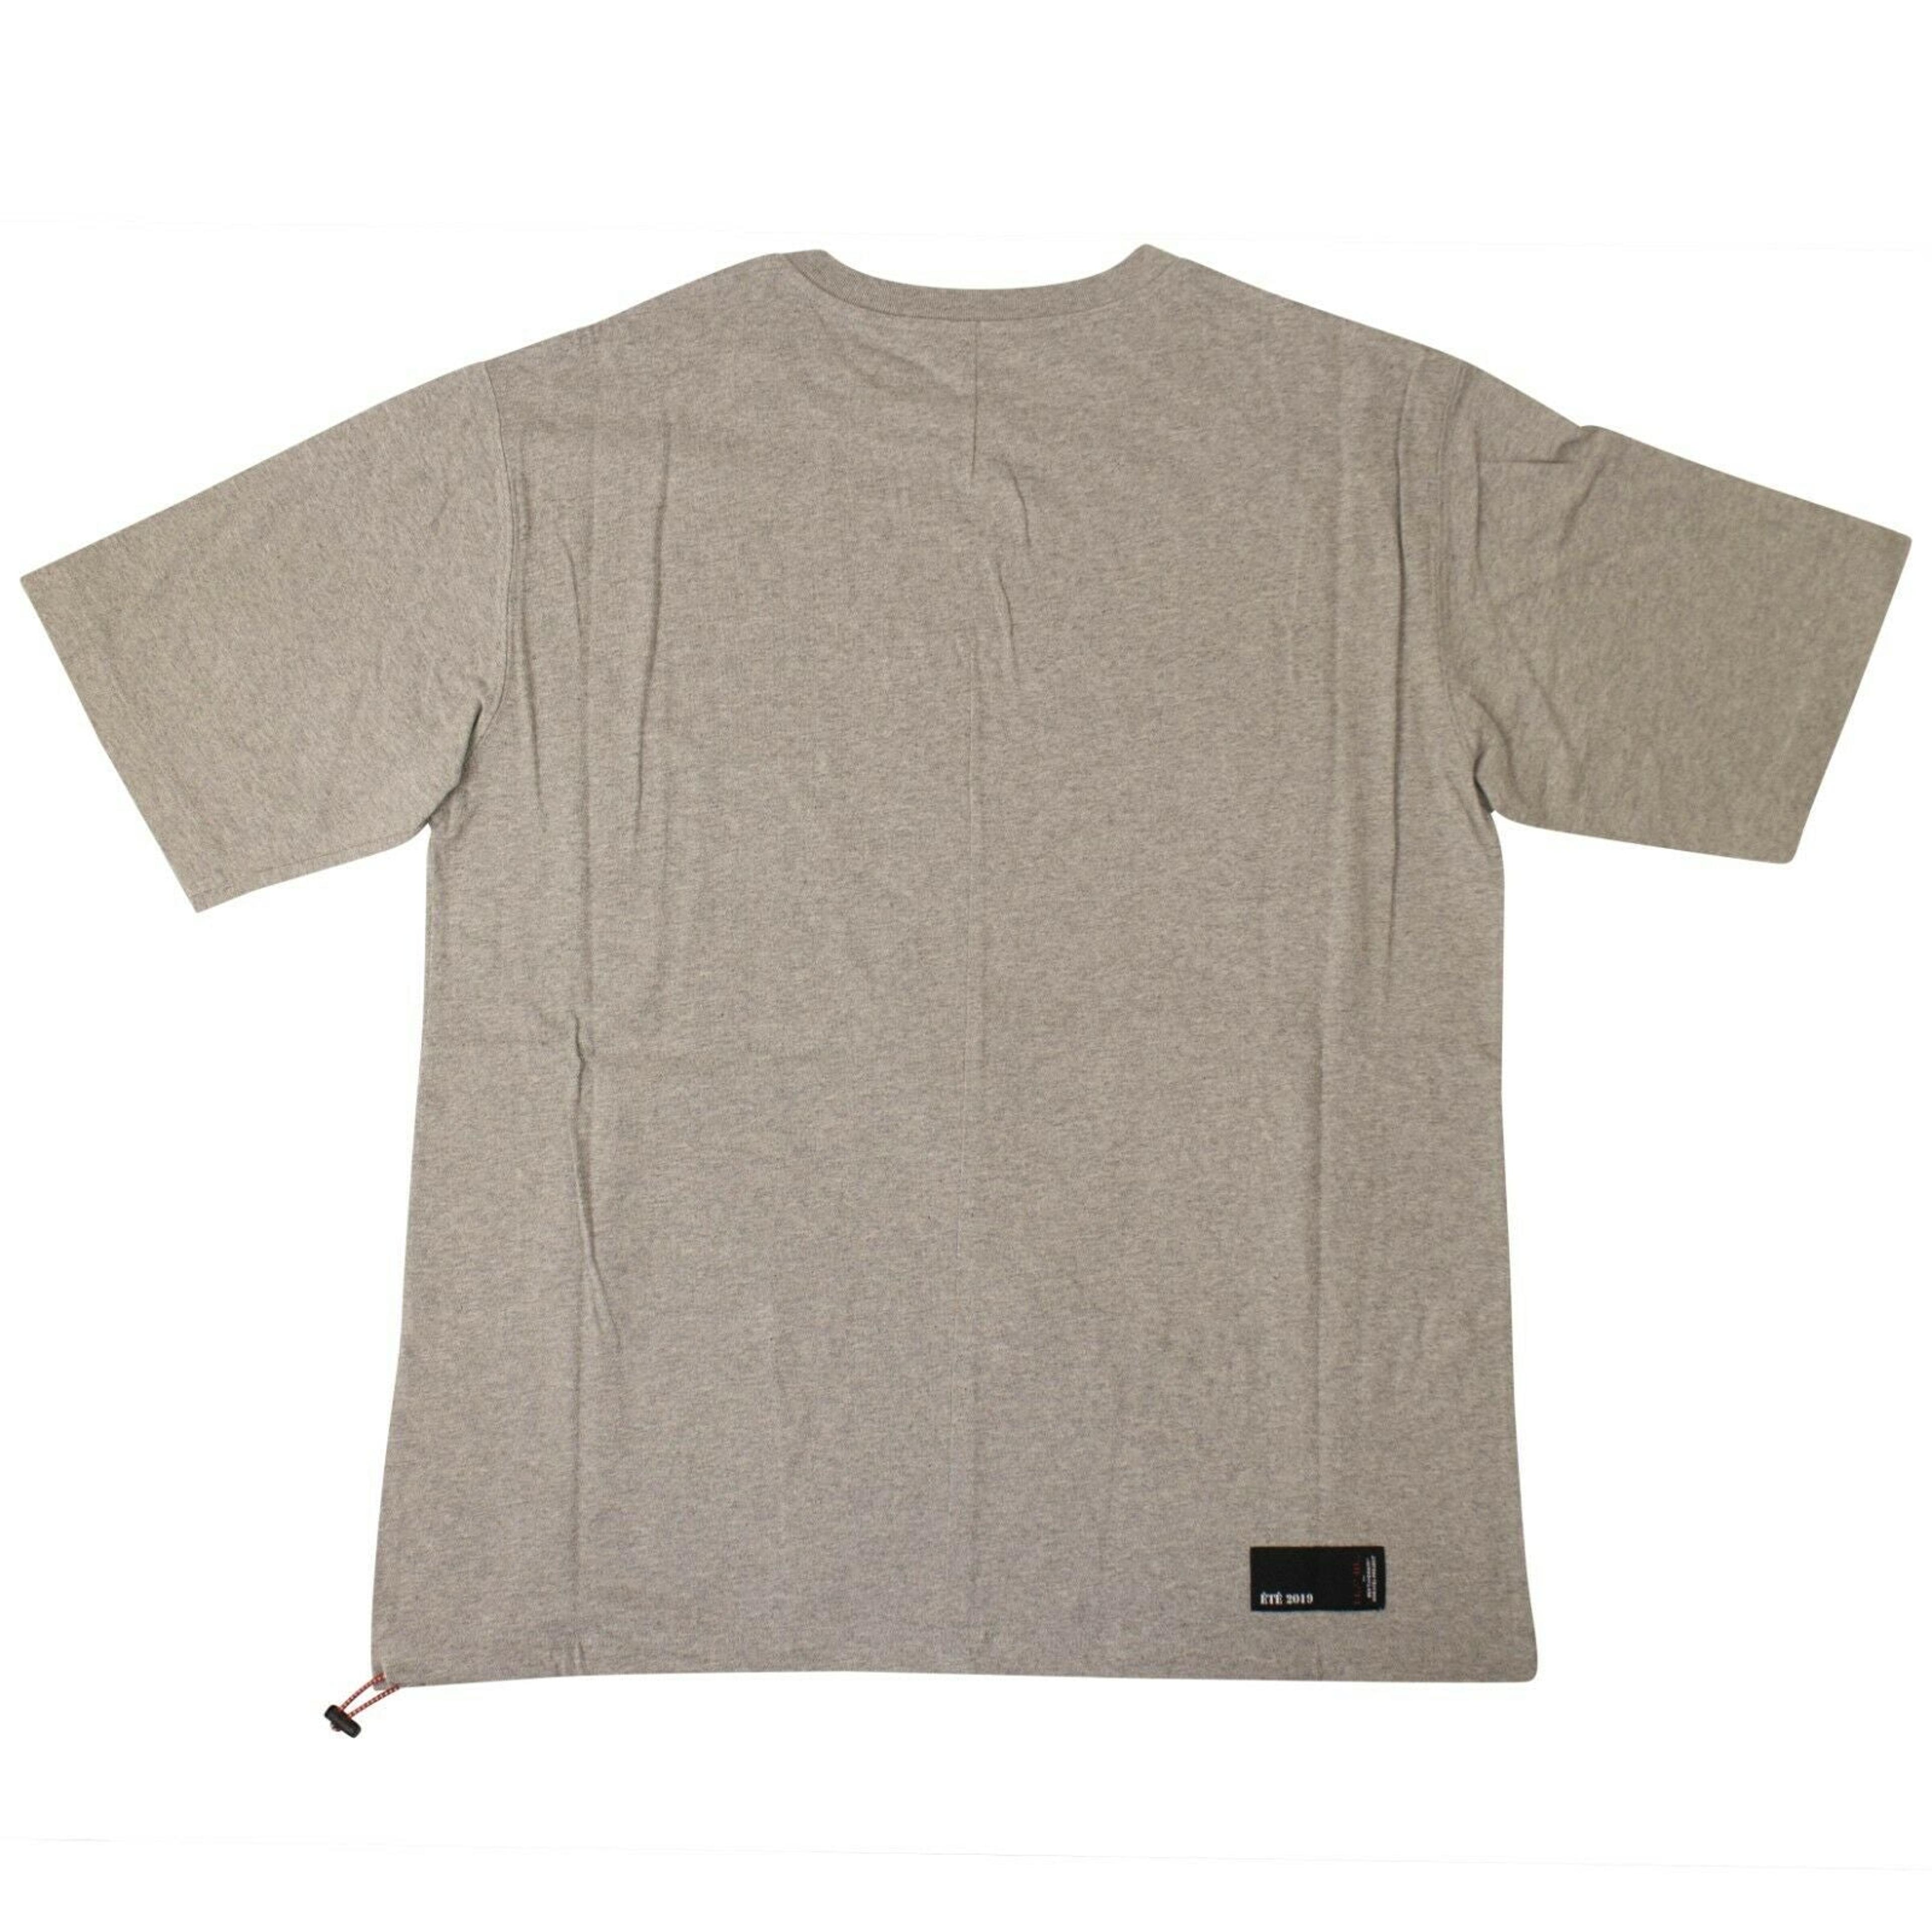 Alternate View 1 of Unravel Project Oversized Logo T-Shirt - Gray